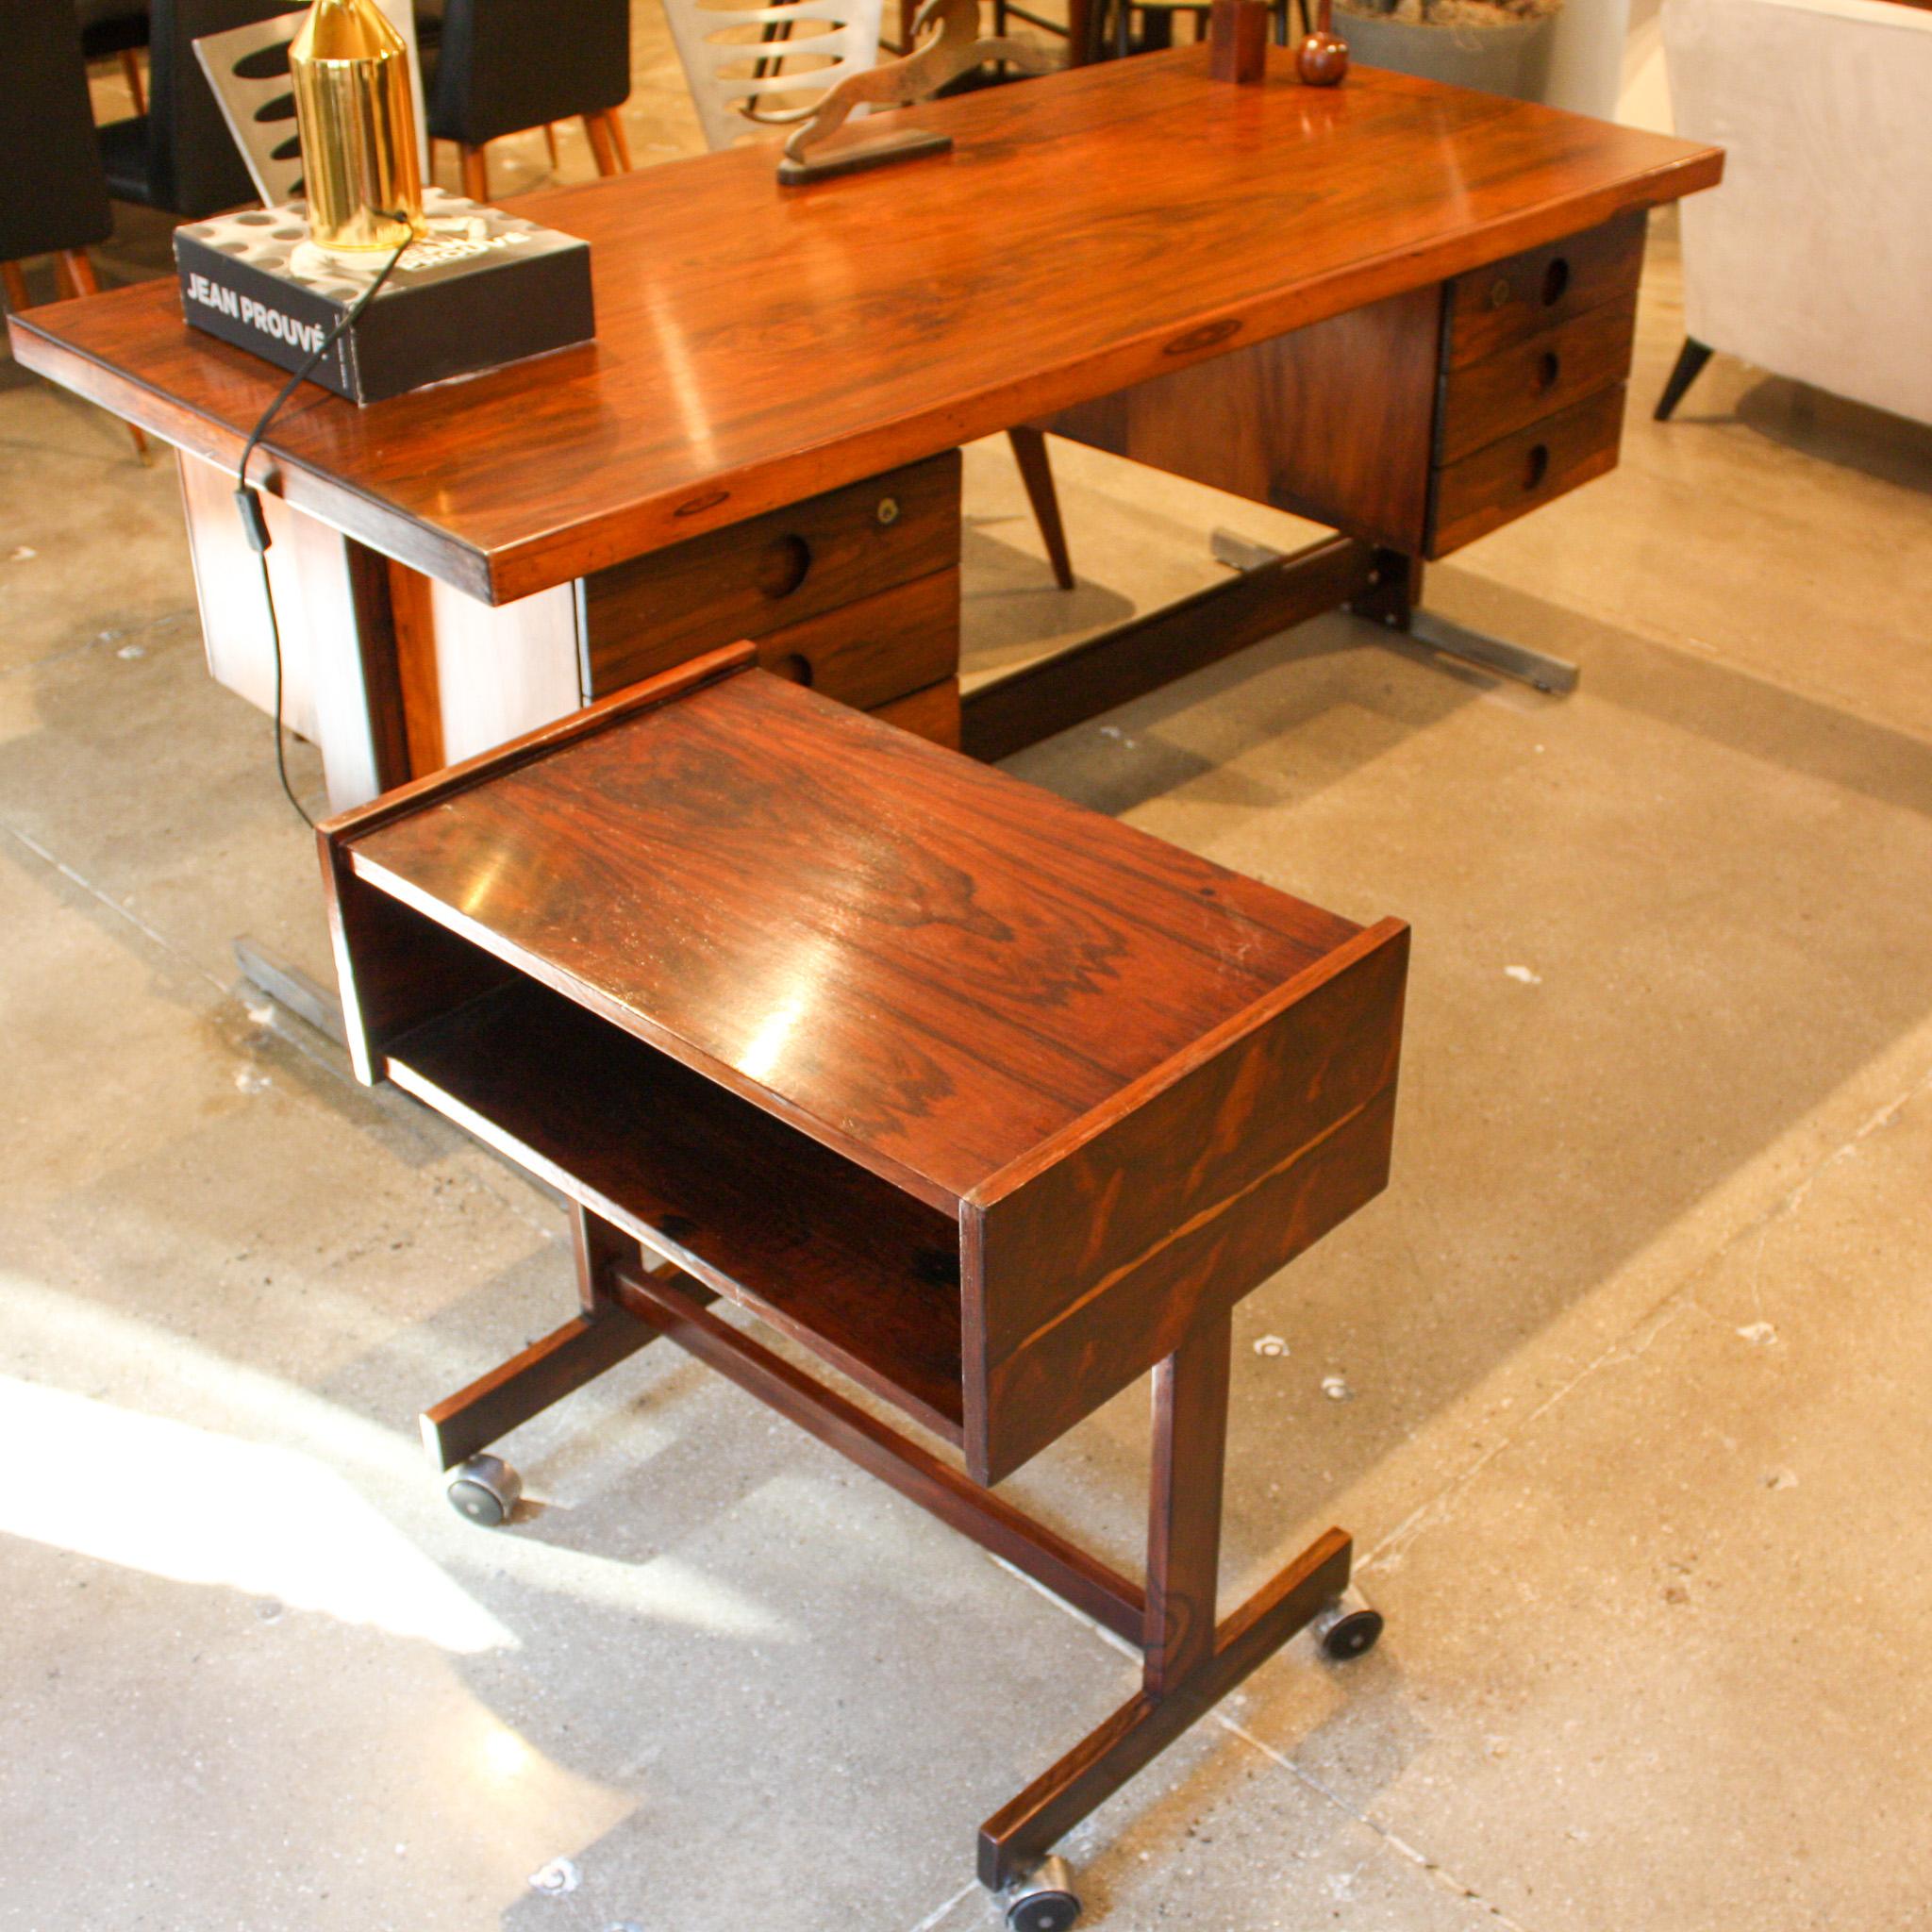 Brazilian Modern Desk in Hardwood with Floating Drawers, Sergio Rodrigues, 1960s For Sale 10